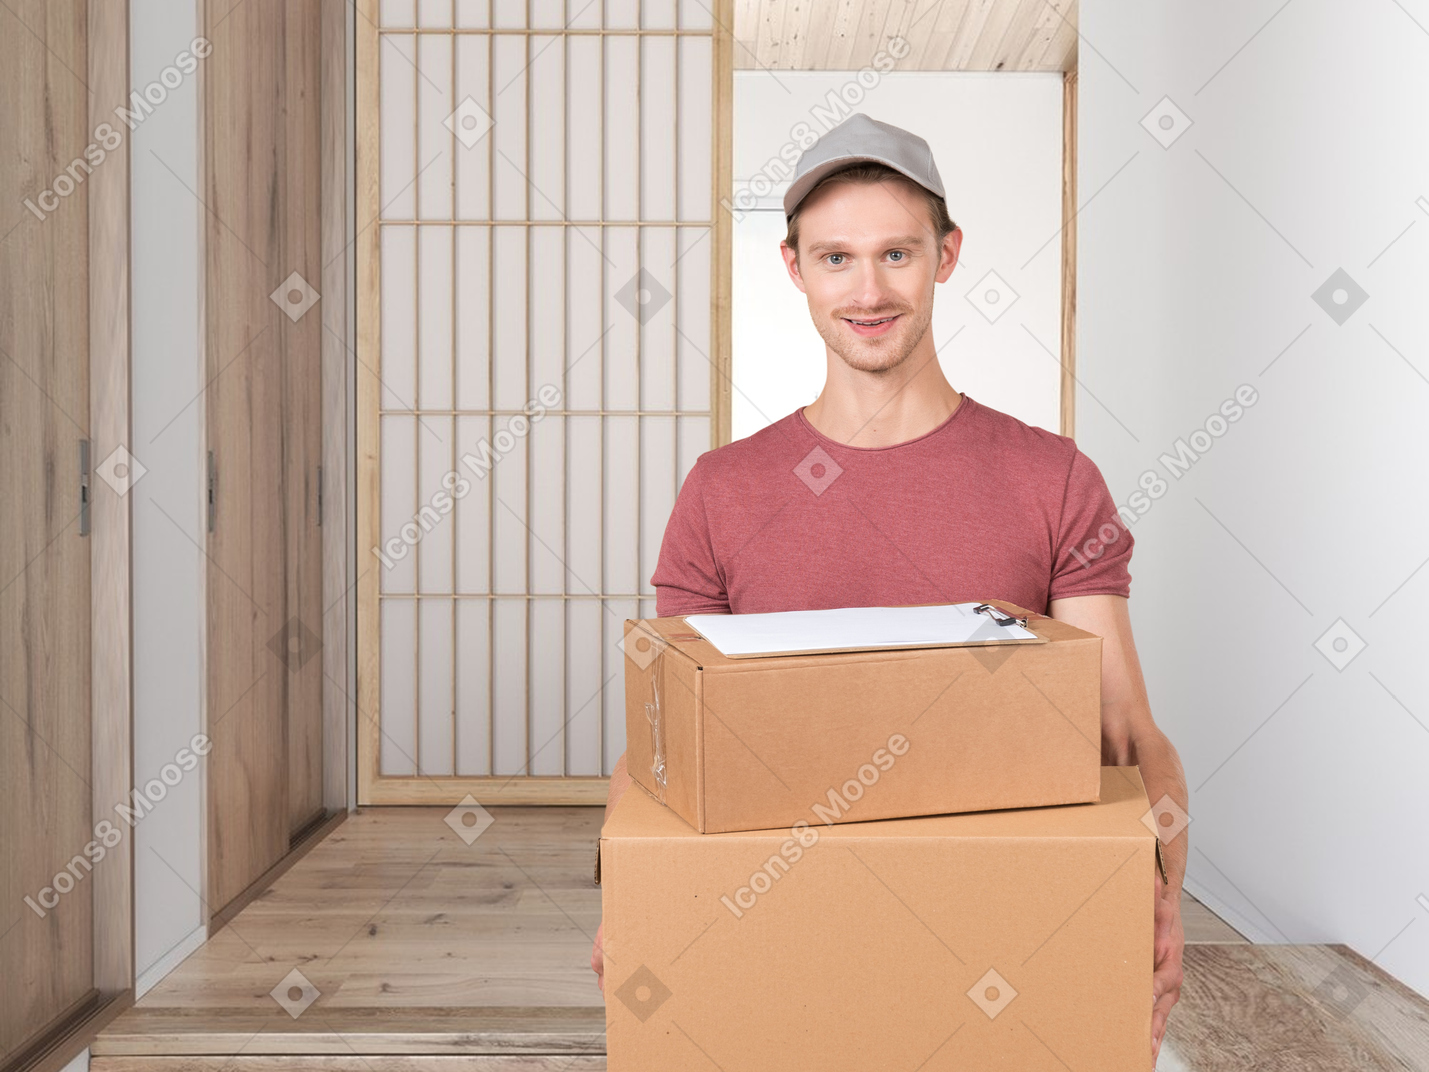 A man holding two boxes in a room